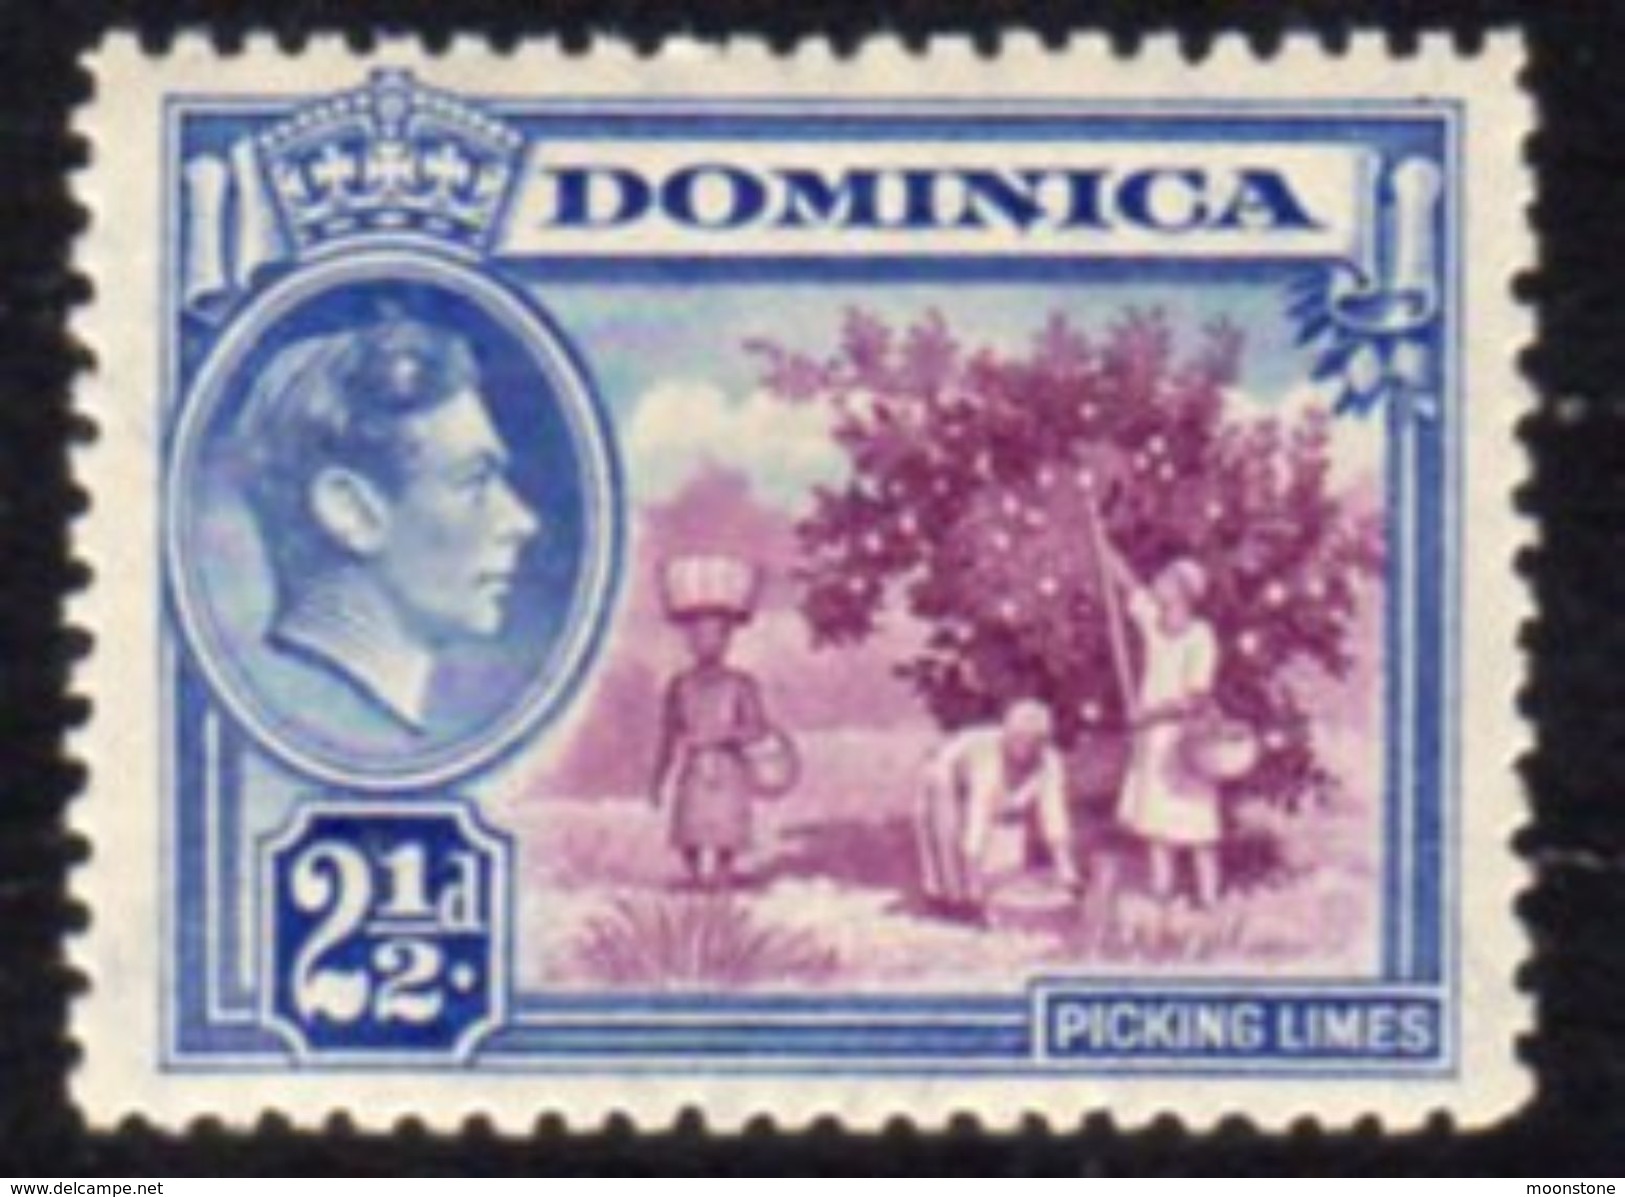 Dominica 1938-47 GVI 2½d Pictorial Definitive, Hinged Mint, SG 103 - Dominica (...-1978)